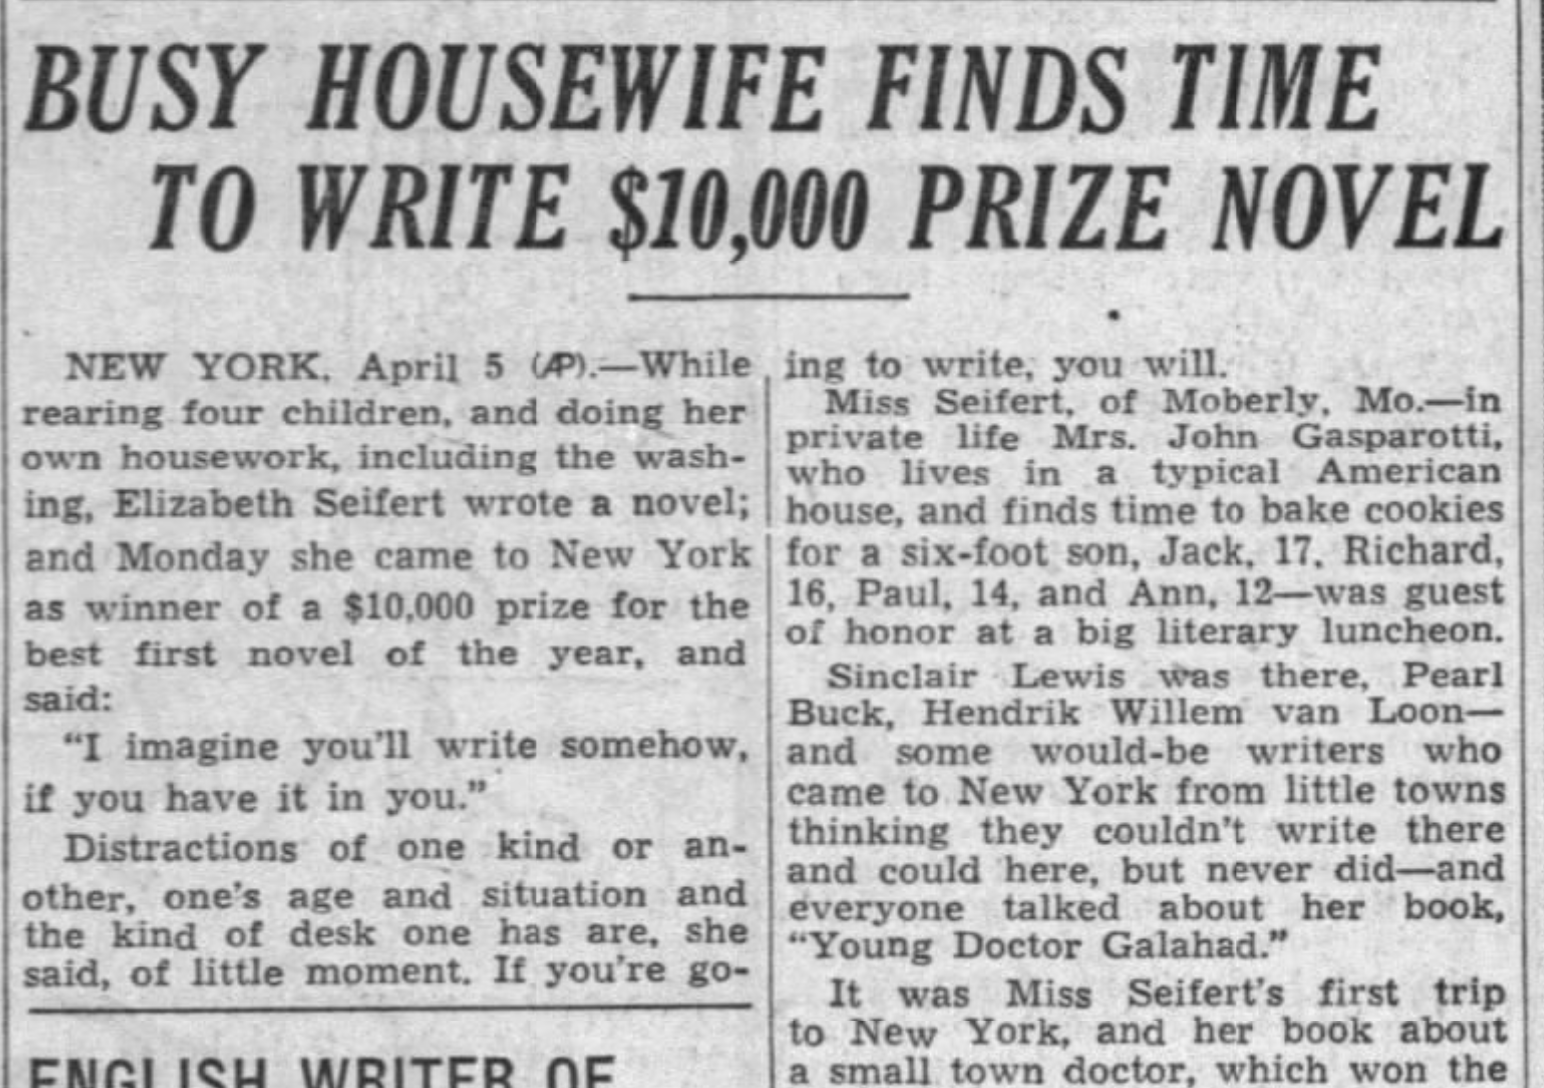 “Busy Housewife Finds Time to Write $10,000 Prize Novel,” while "rearing four children, and doing her own housework, including the washing.”